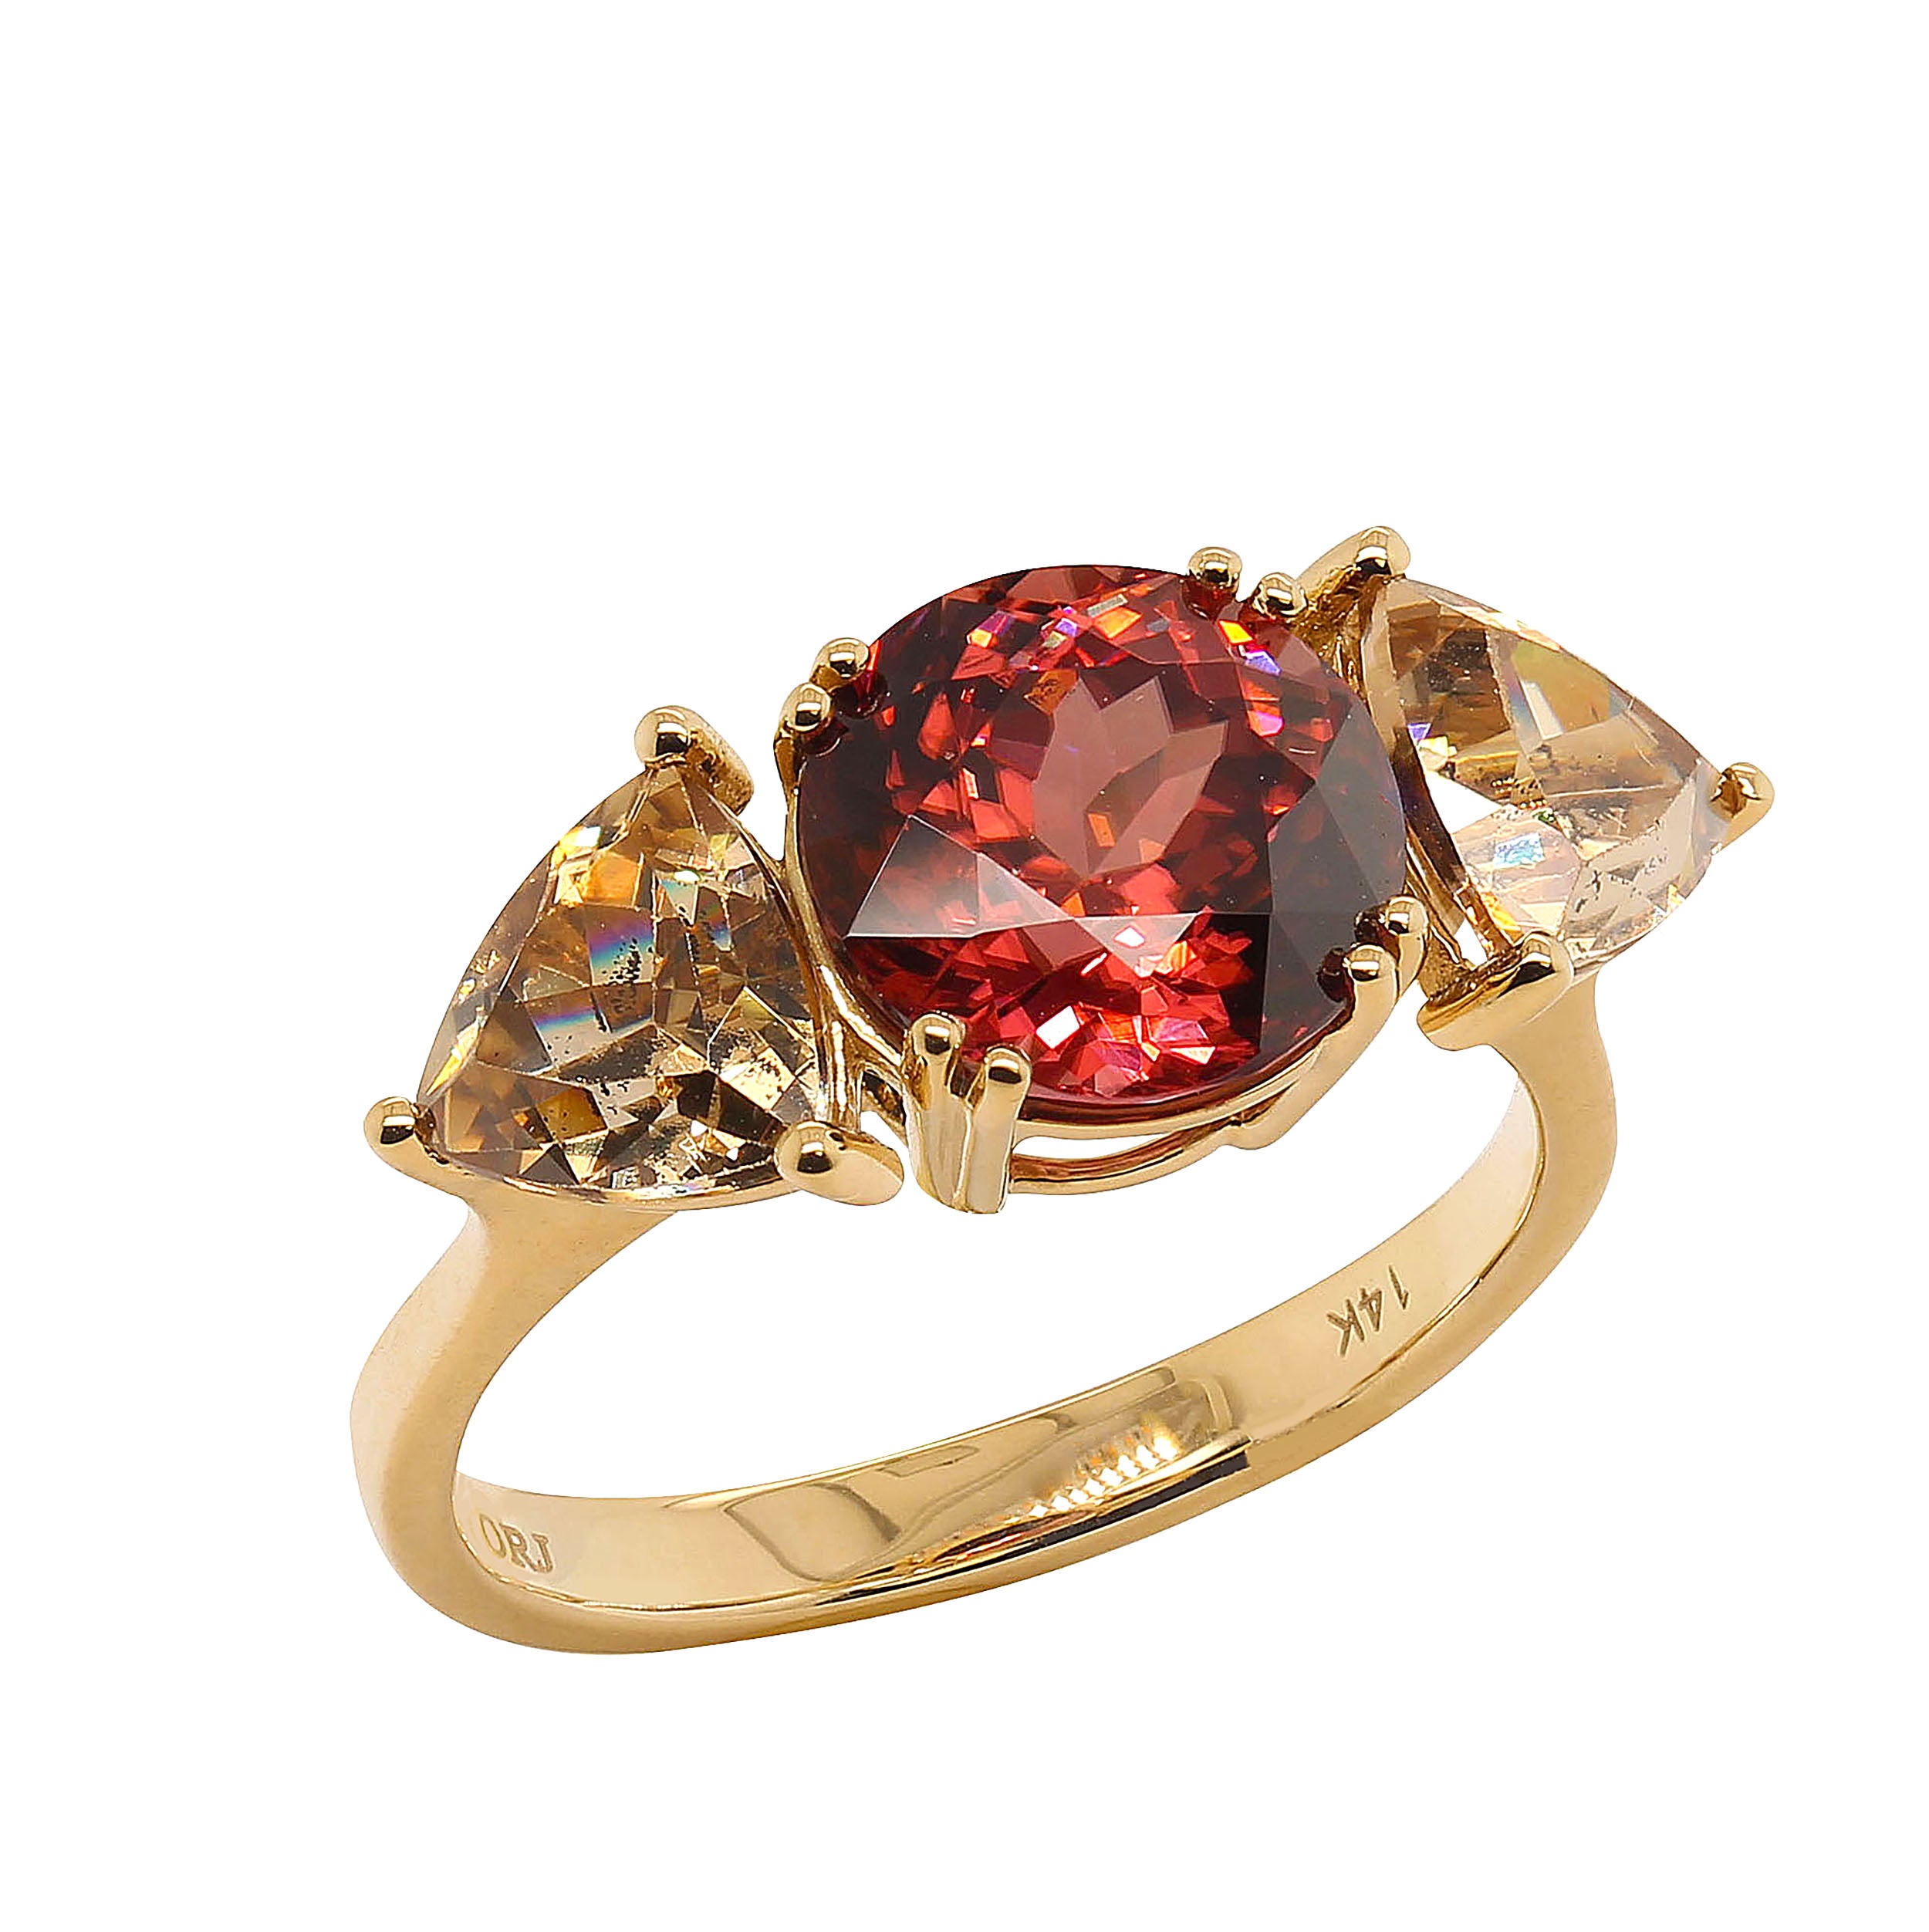 AJD Elegant Red and Smoky Cambodian Zircon Dinner Ring